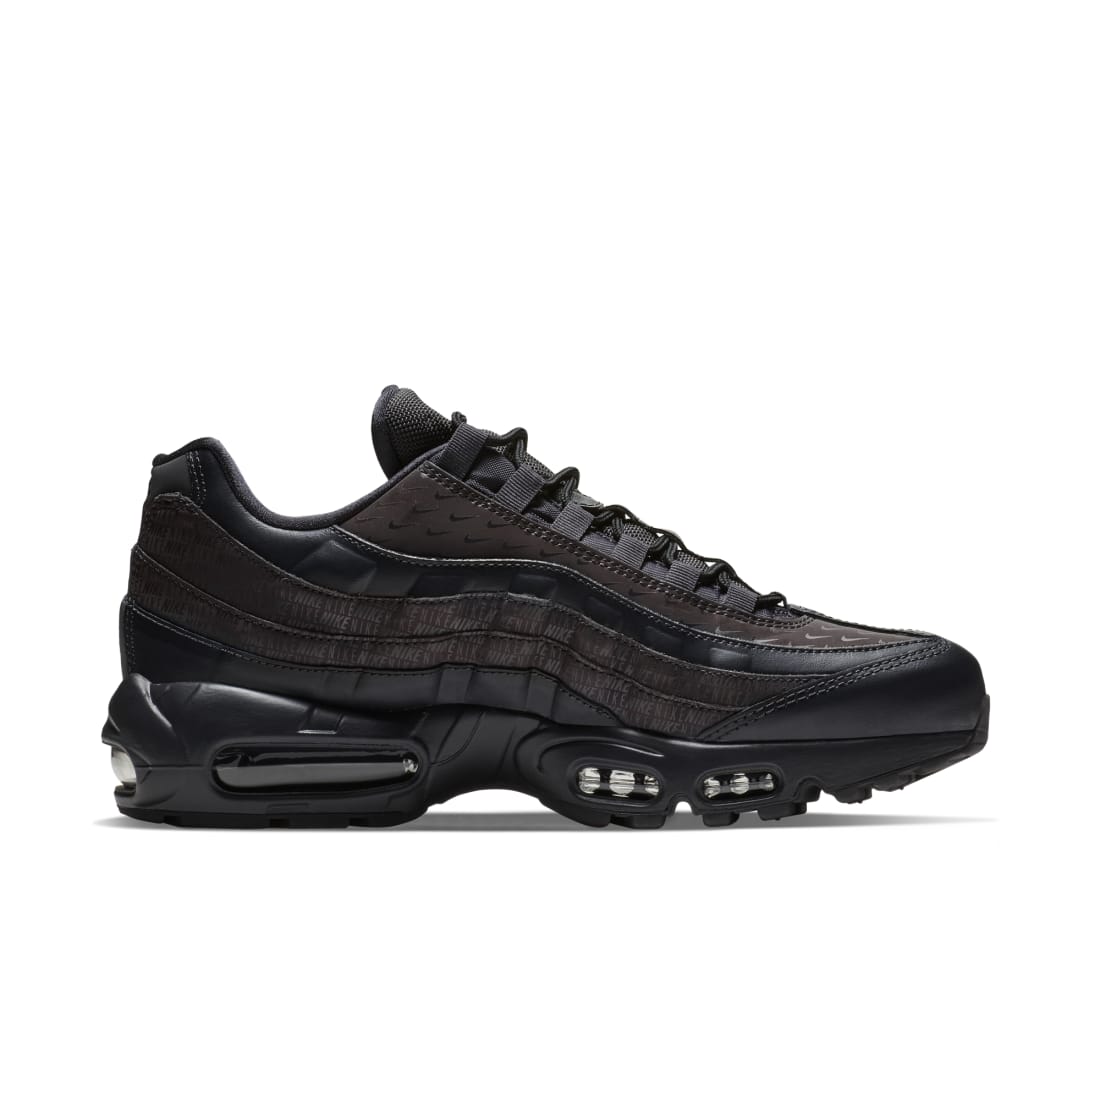 Lively Antarctic darkness Nike Air Max 95 Reflective Branding Oil Grey | Nike | Release Dates,  Sneaker Calendar, Prices & Collaborations